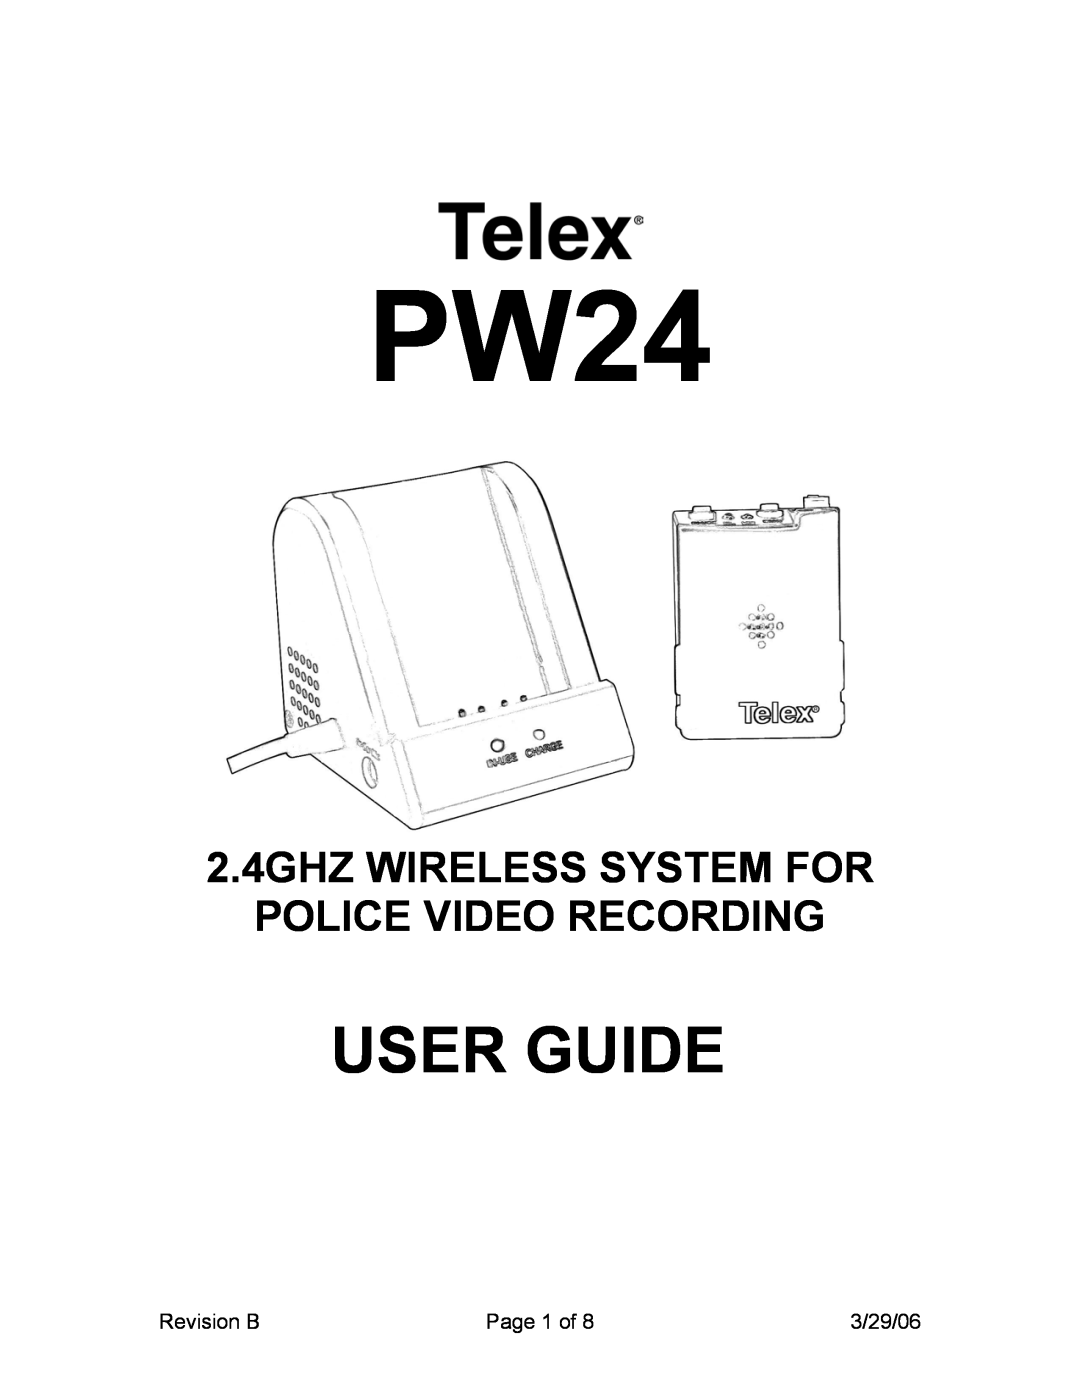 Telex PW24 manual User Guide, 2.4GHZ WIRELESS SYSTEM FOR POLICE VIDEO RECORDING 